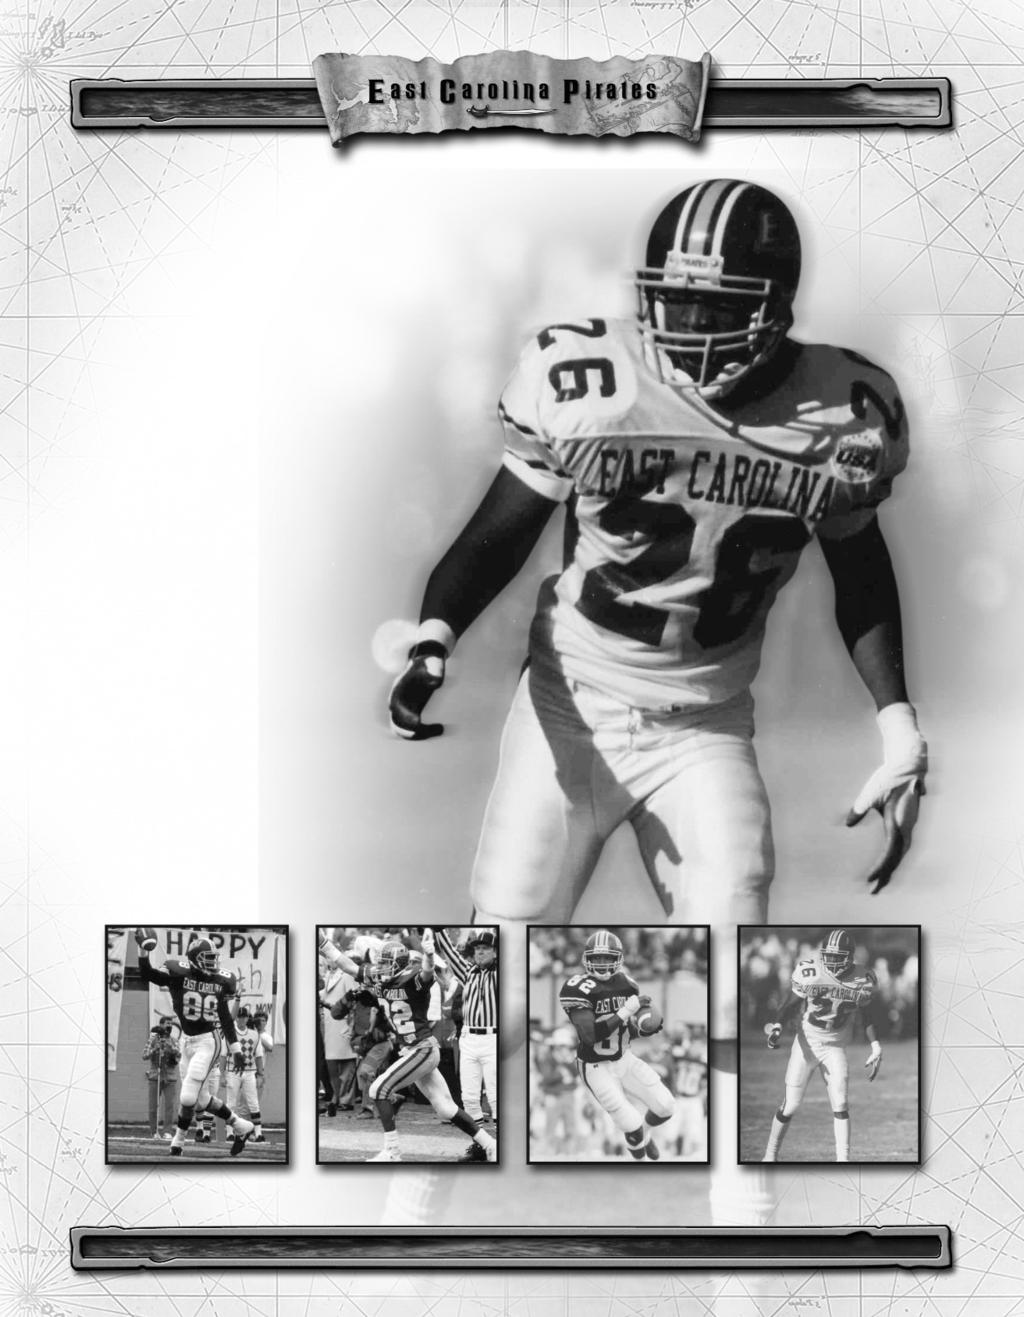 Carlester Crumpler, Jr. (1990-93) was named a First-Team Walter Camp All-America as a tight end in 1993.